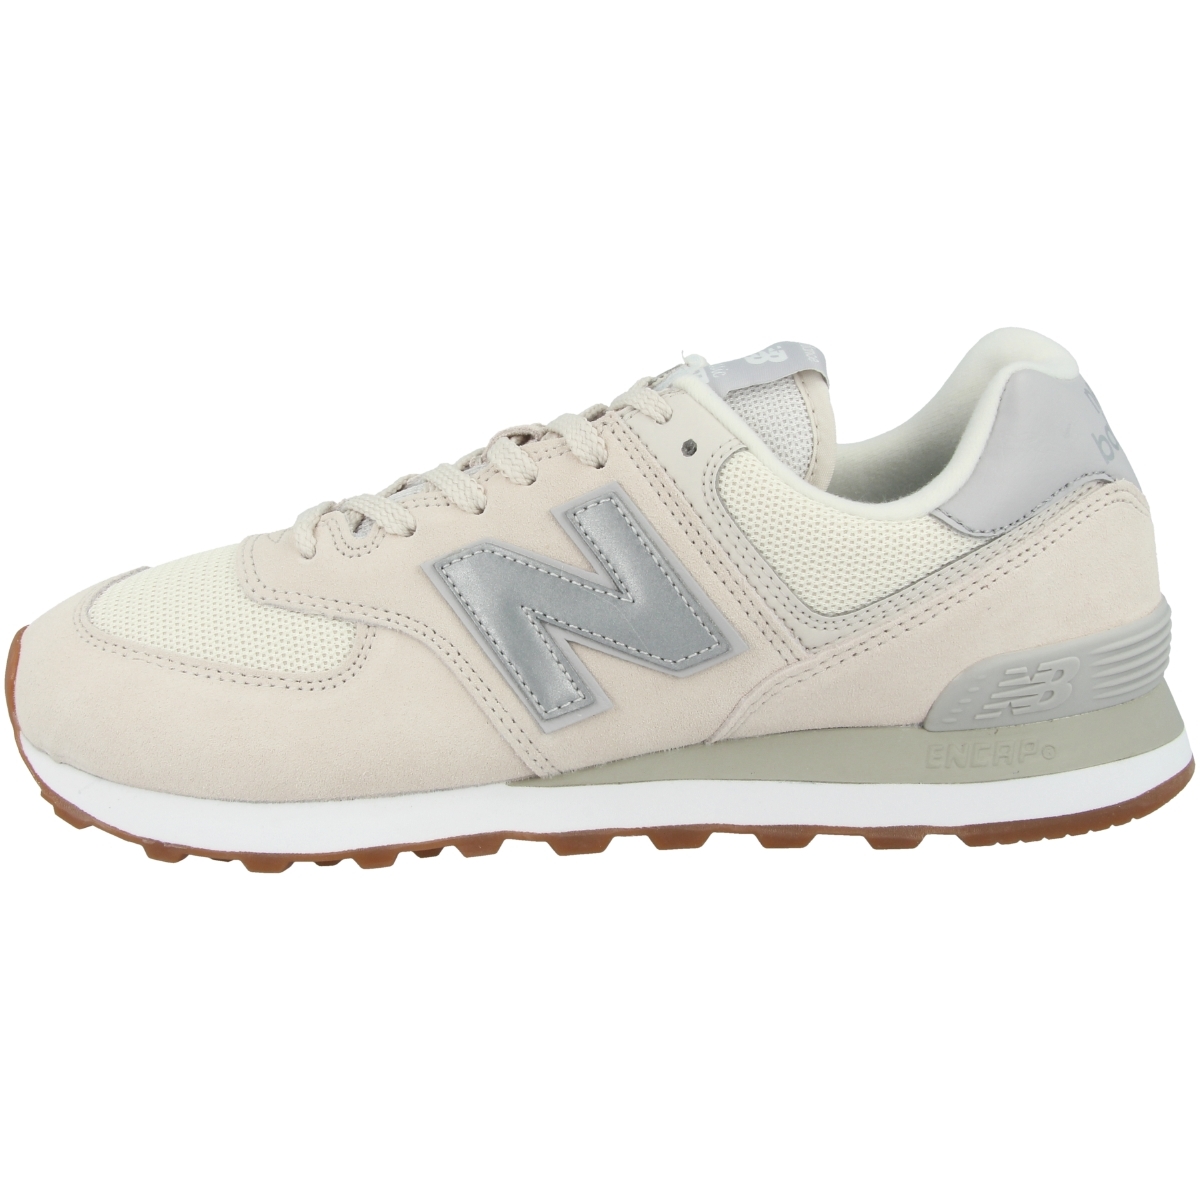 New Balance ML 574 Sc Men's Shoes Casual Trainers Lace up Trainers ...